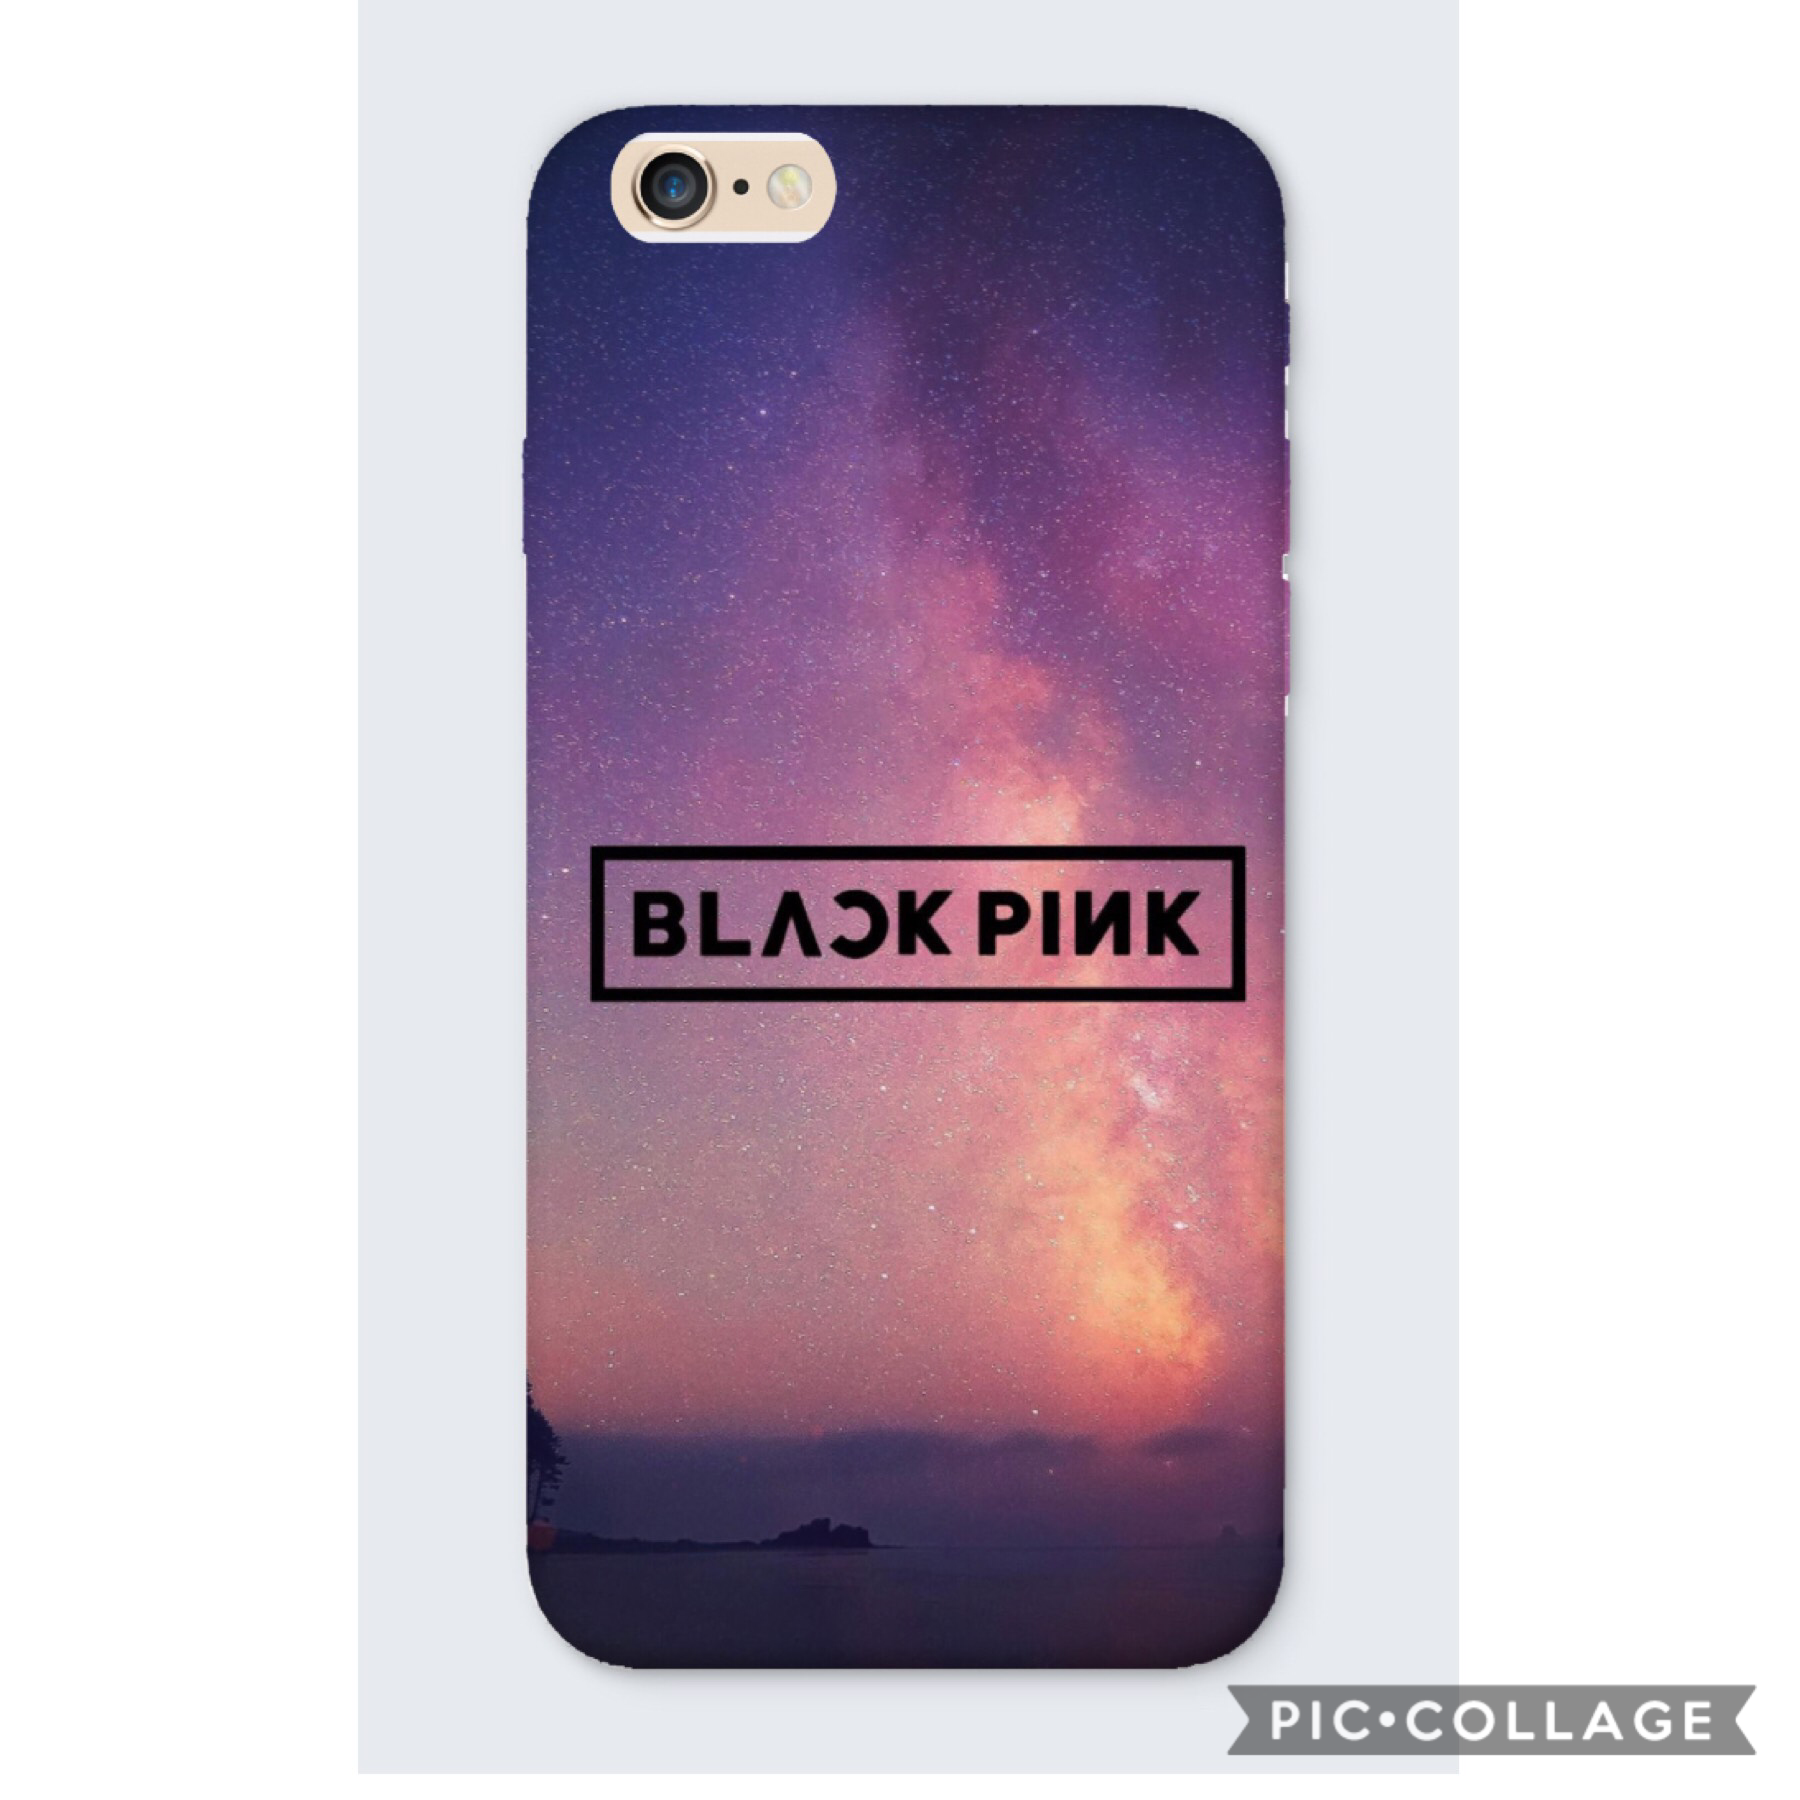 Feel free to use this BLACKPINK phone case I made! 